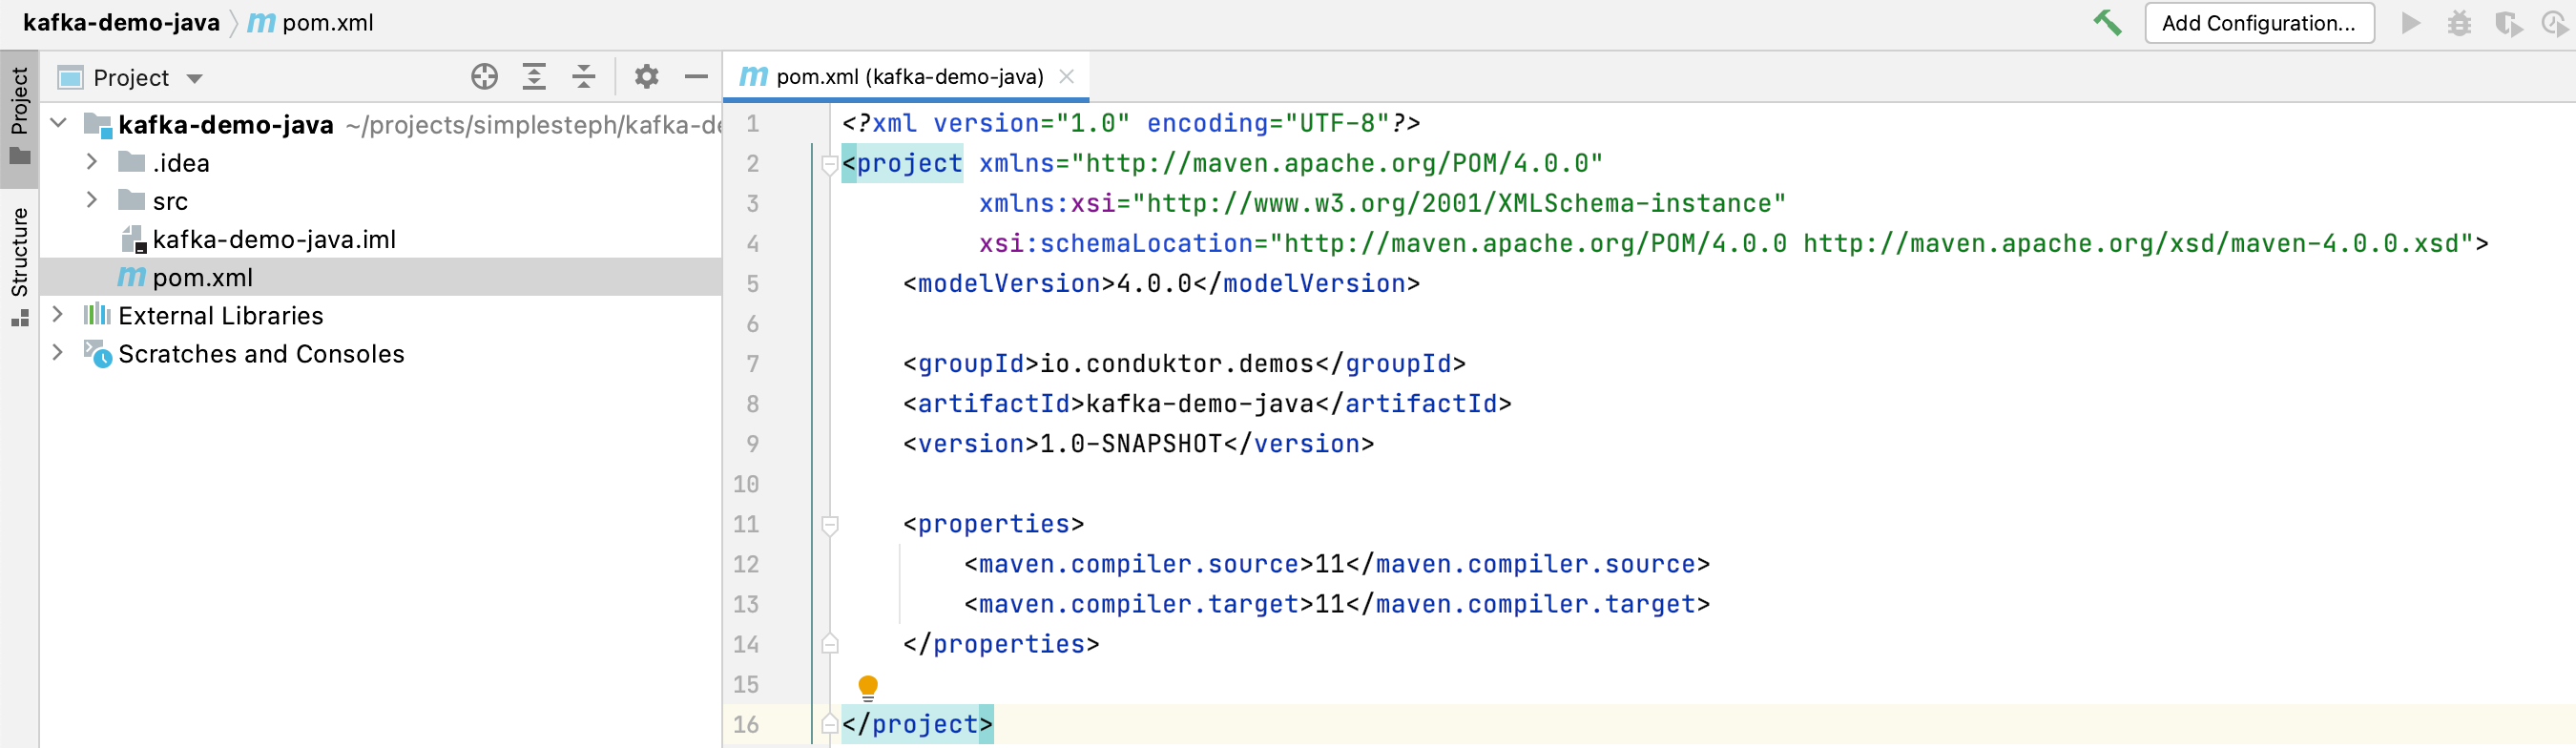 Defining the dependencies for Kafka Maven Client project in pom.xl xml file screenshot.